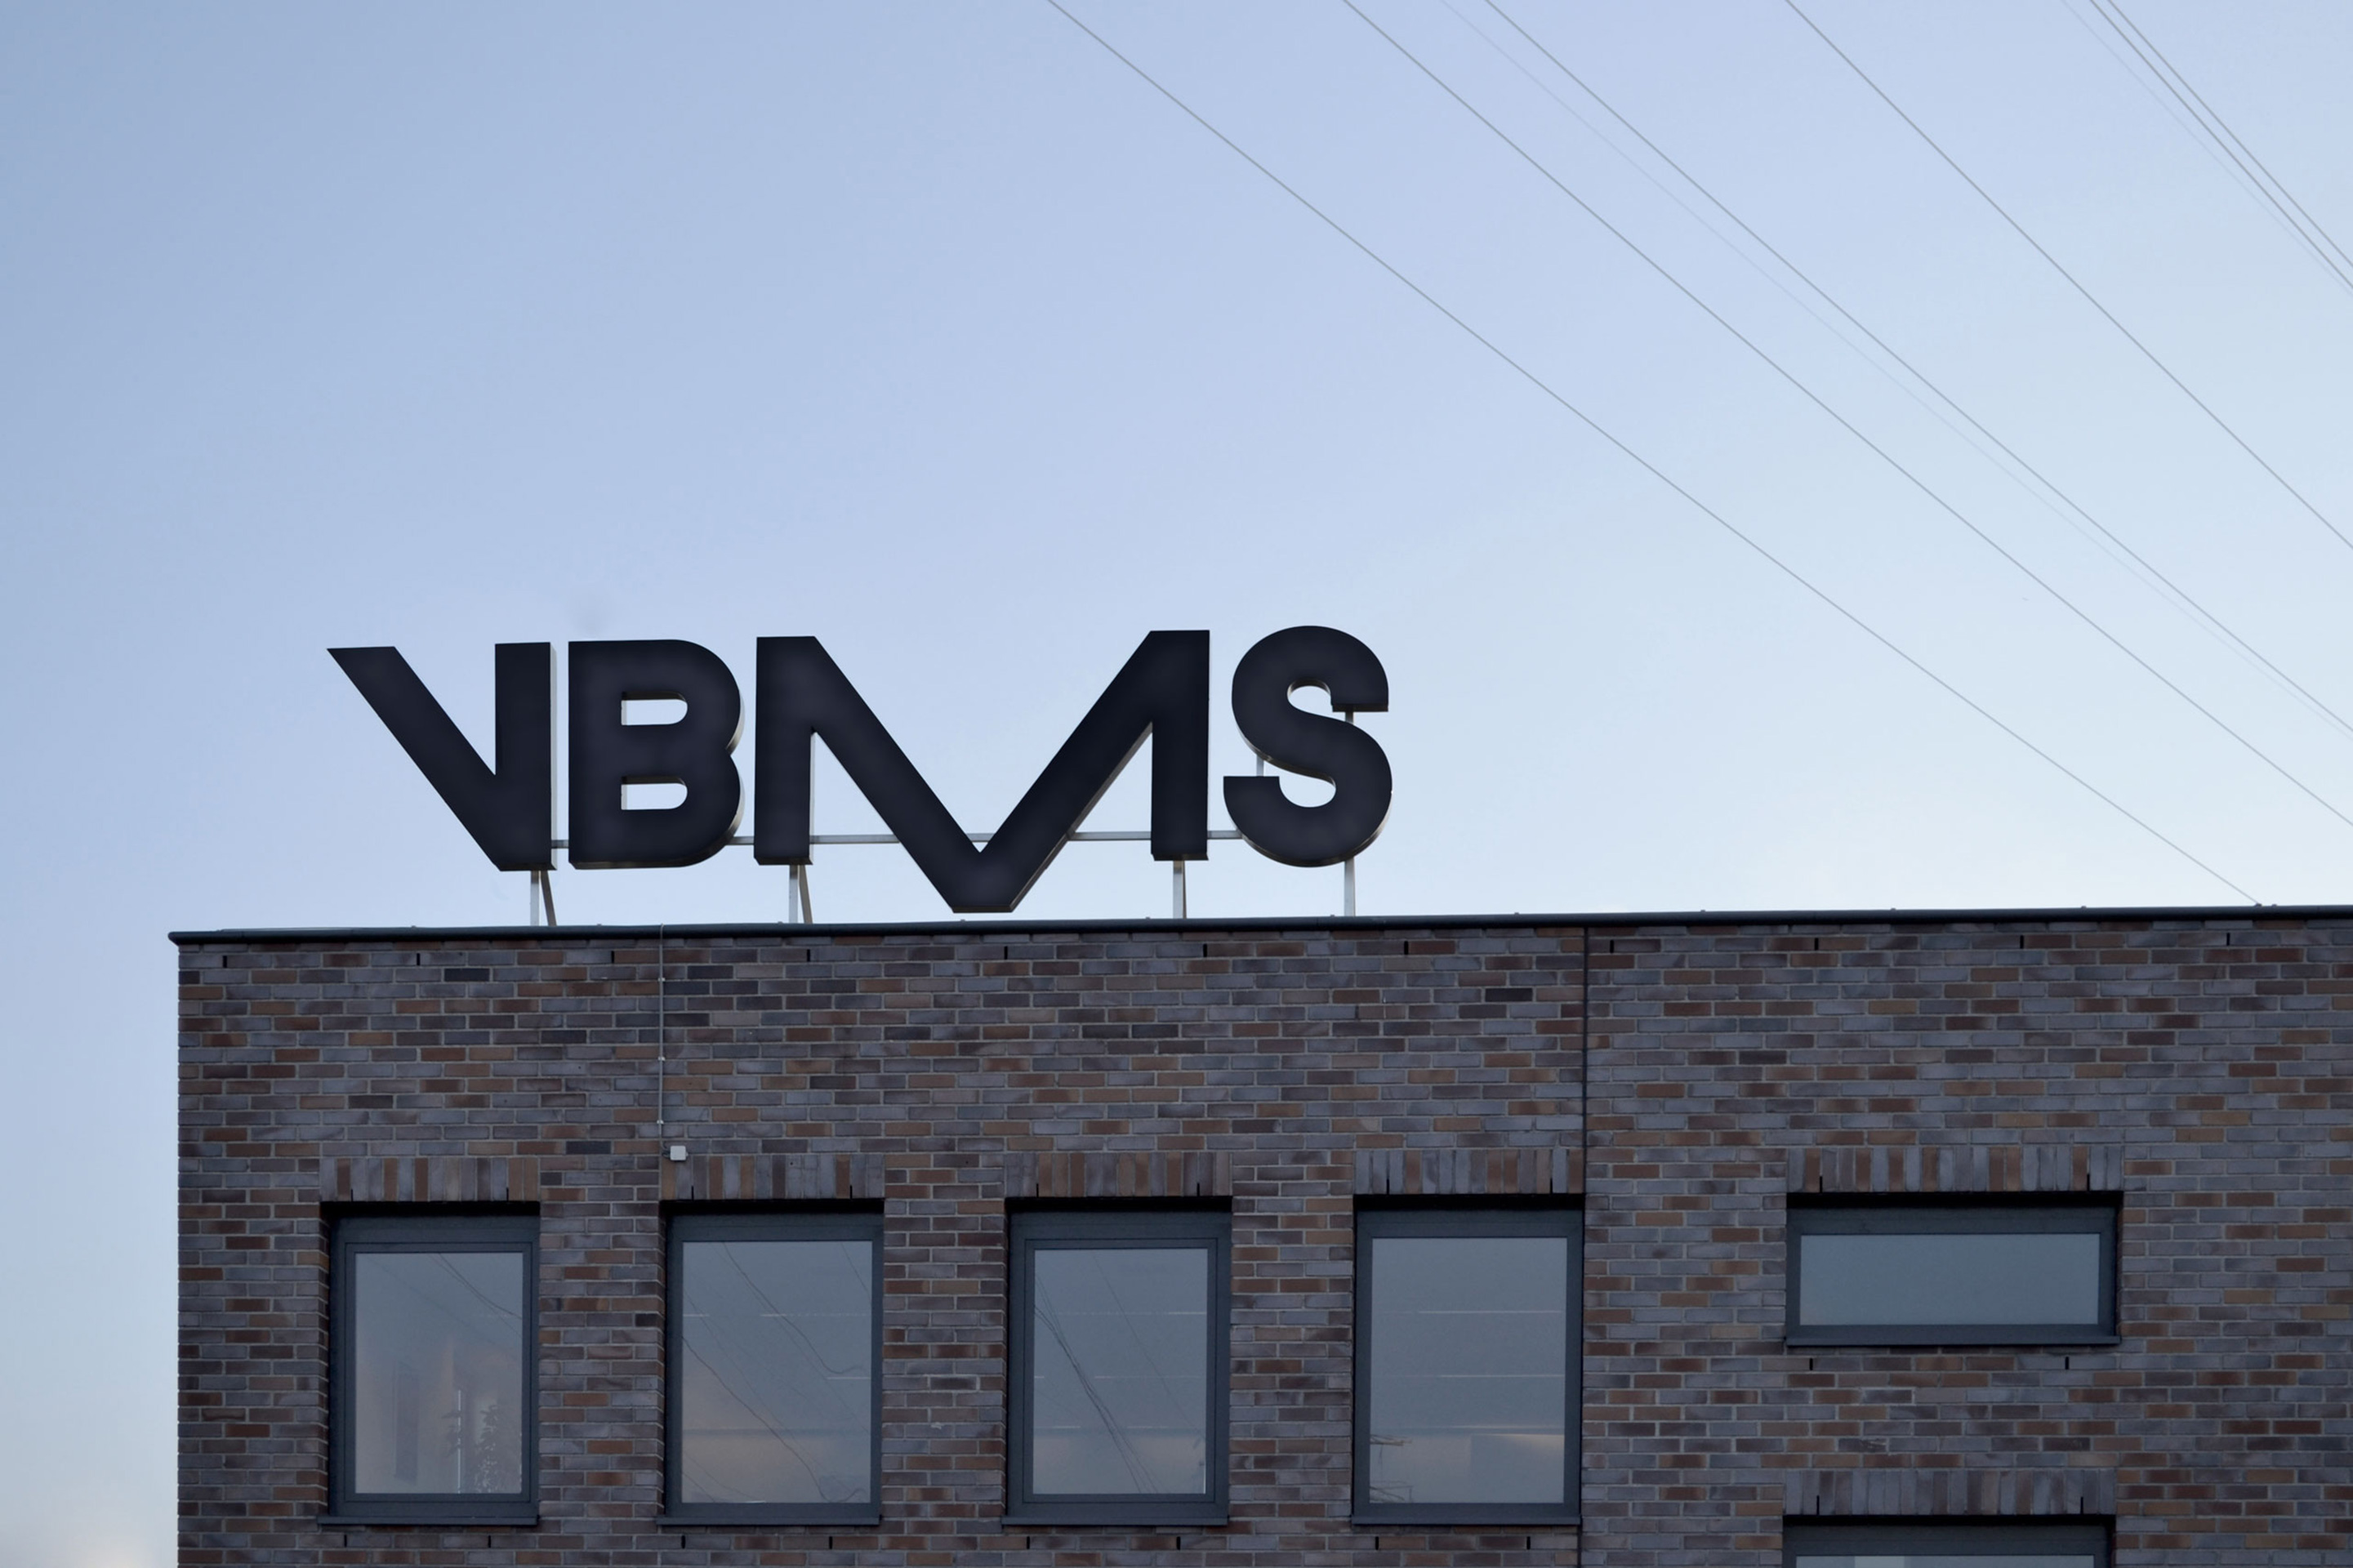 Logotype and signage by Studio Dumbar for VBMS